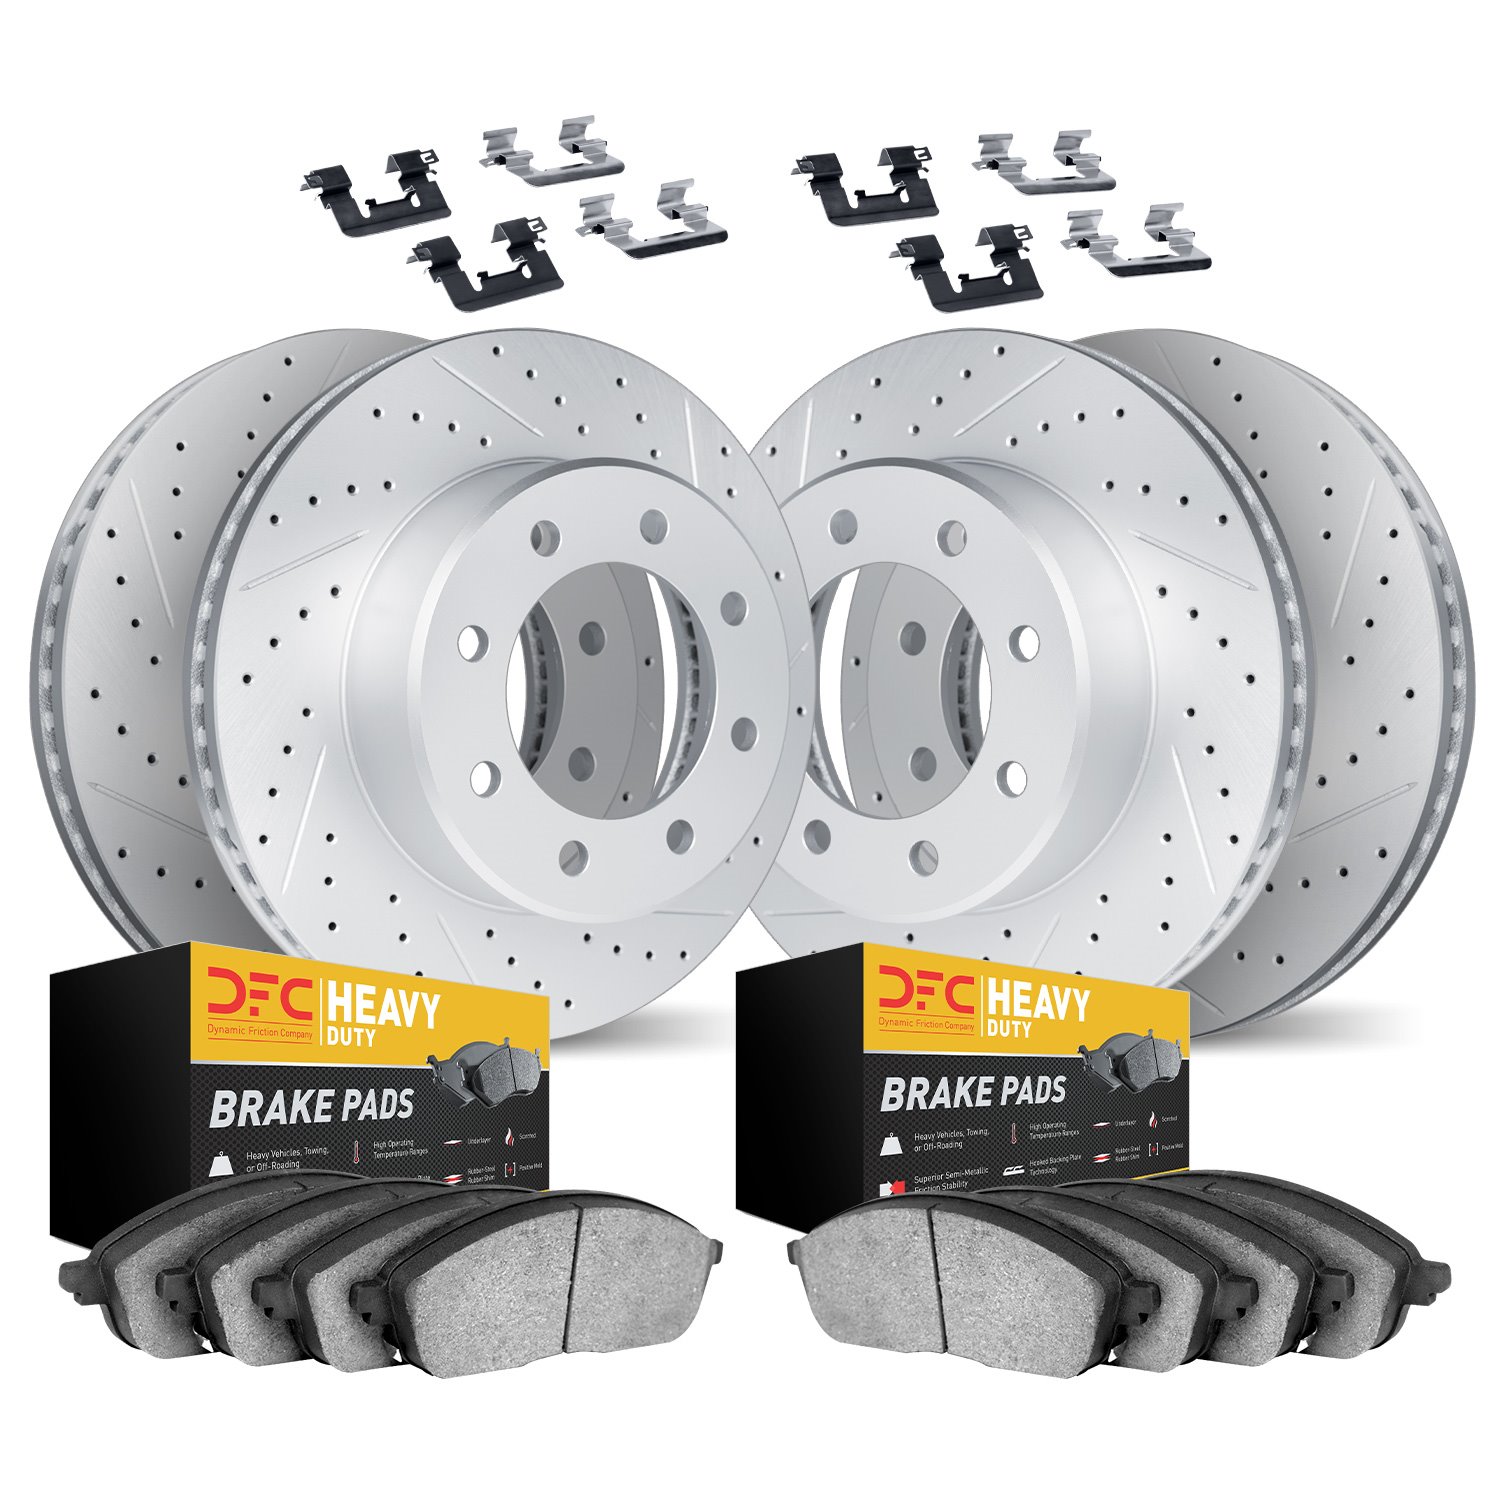 2214-99077 Geoperformance Drilled/Slotted Rotors w/Heavy-Duty Pads Kit & Hardware, 2005-2010 Ford/Lincoln/Mercury/Mazda, Positio